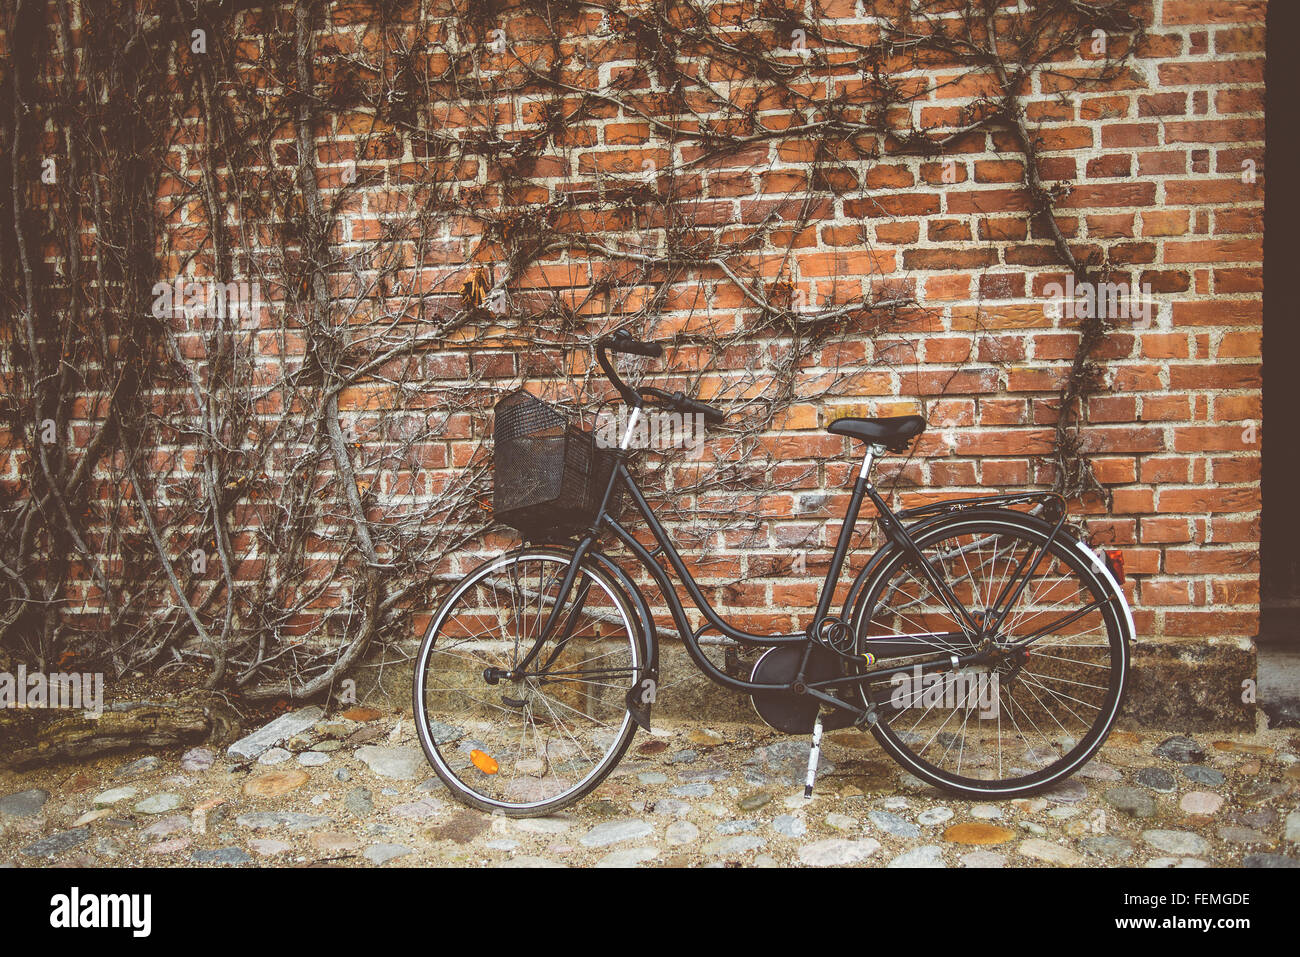 Vintage bicycle leaning on the wall, retro toned image Stock Photo